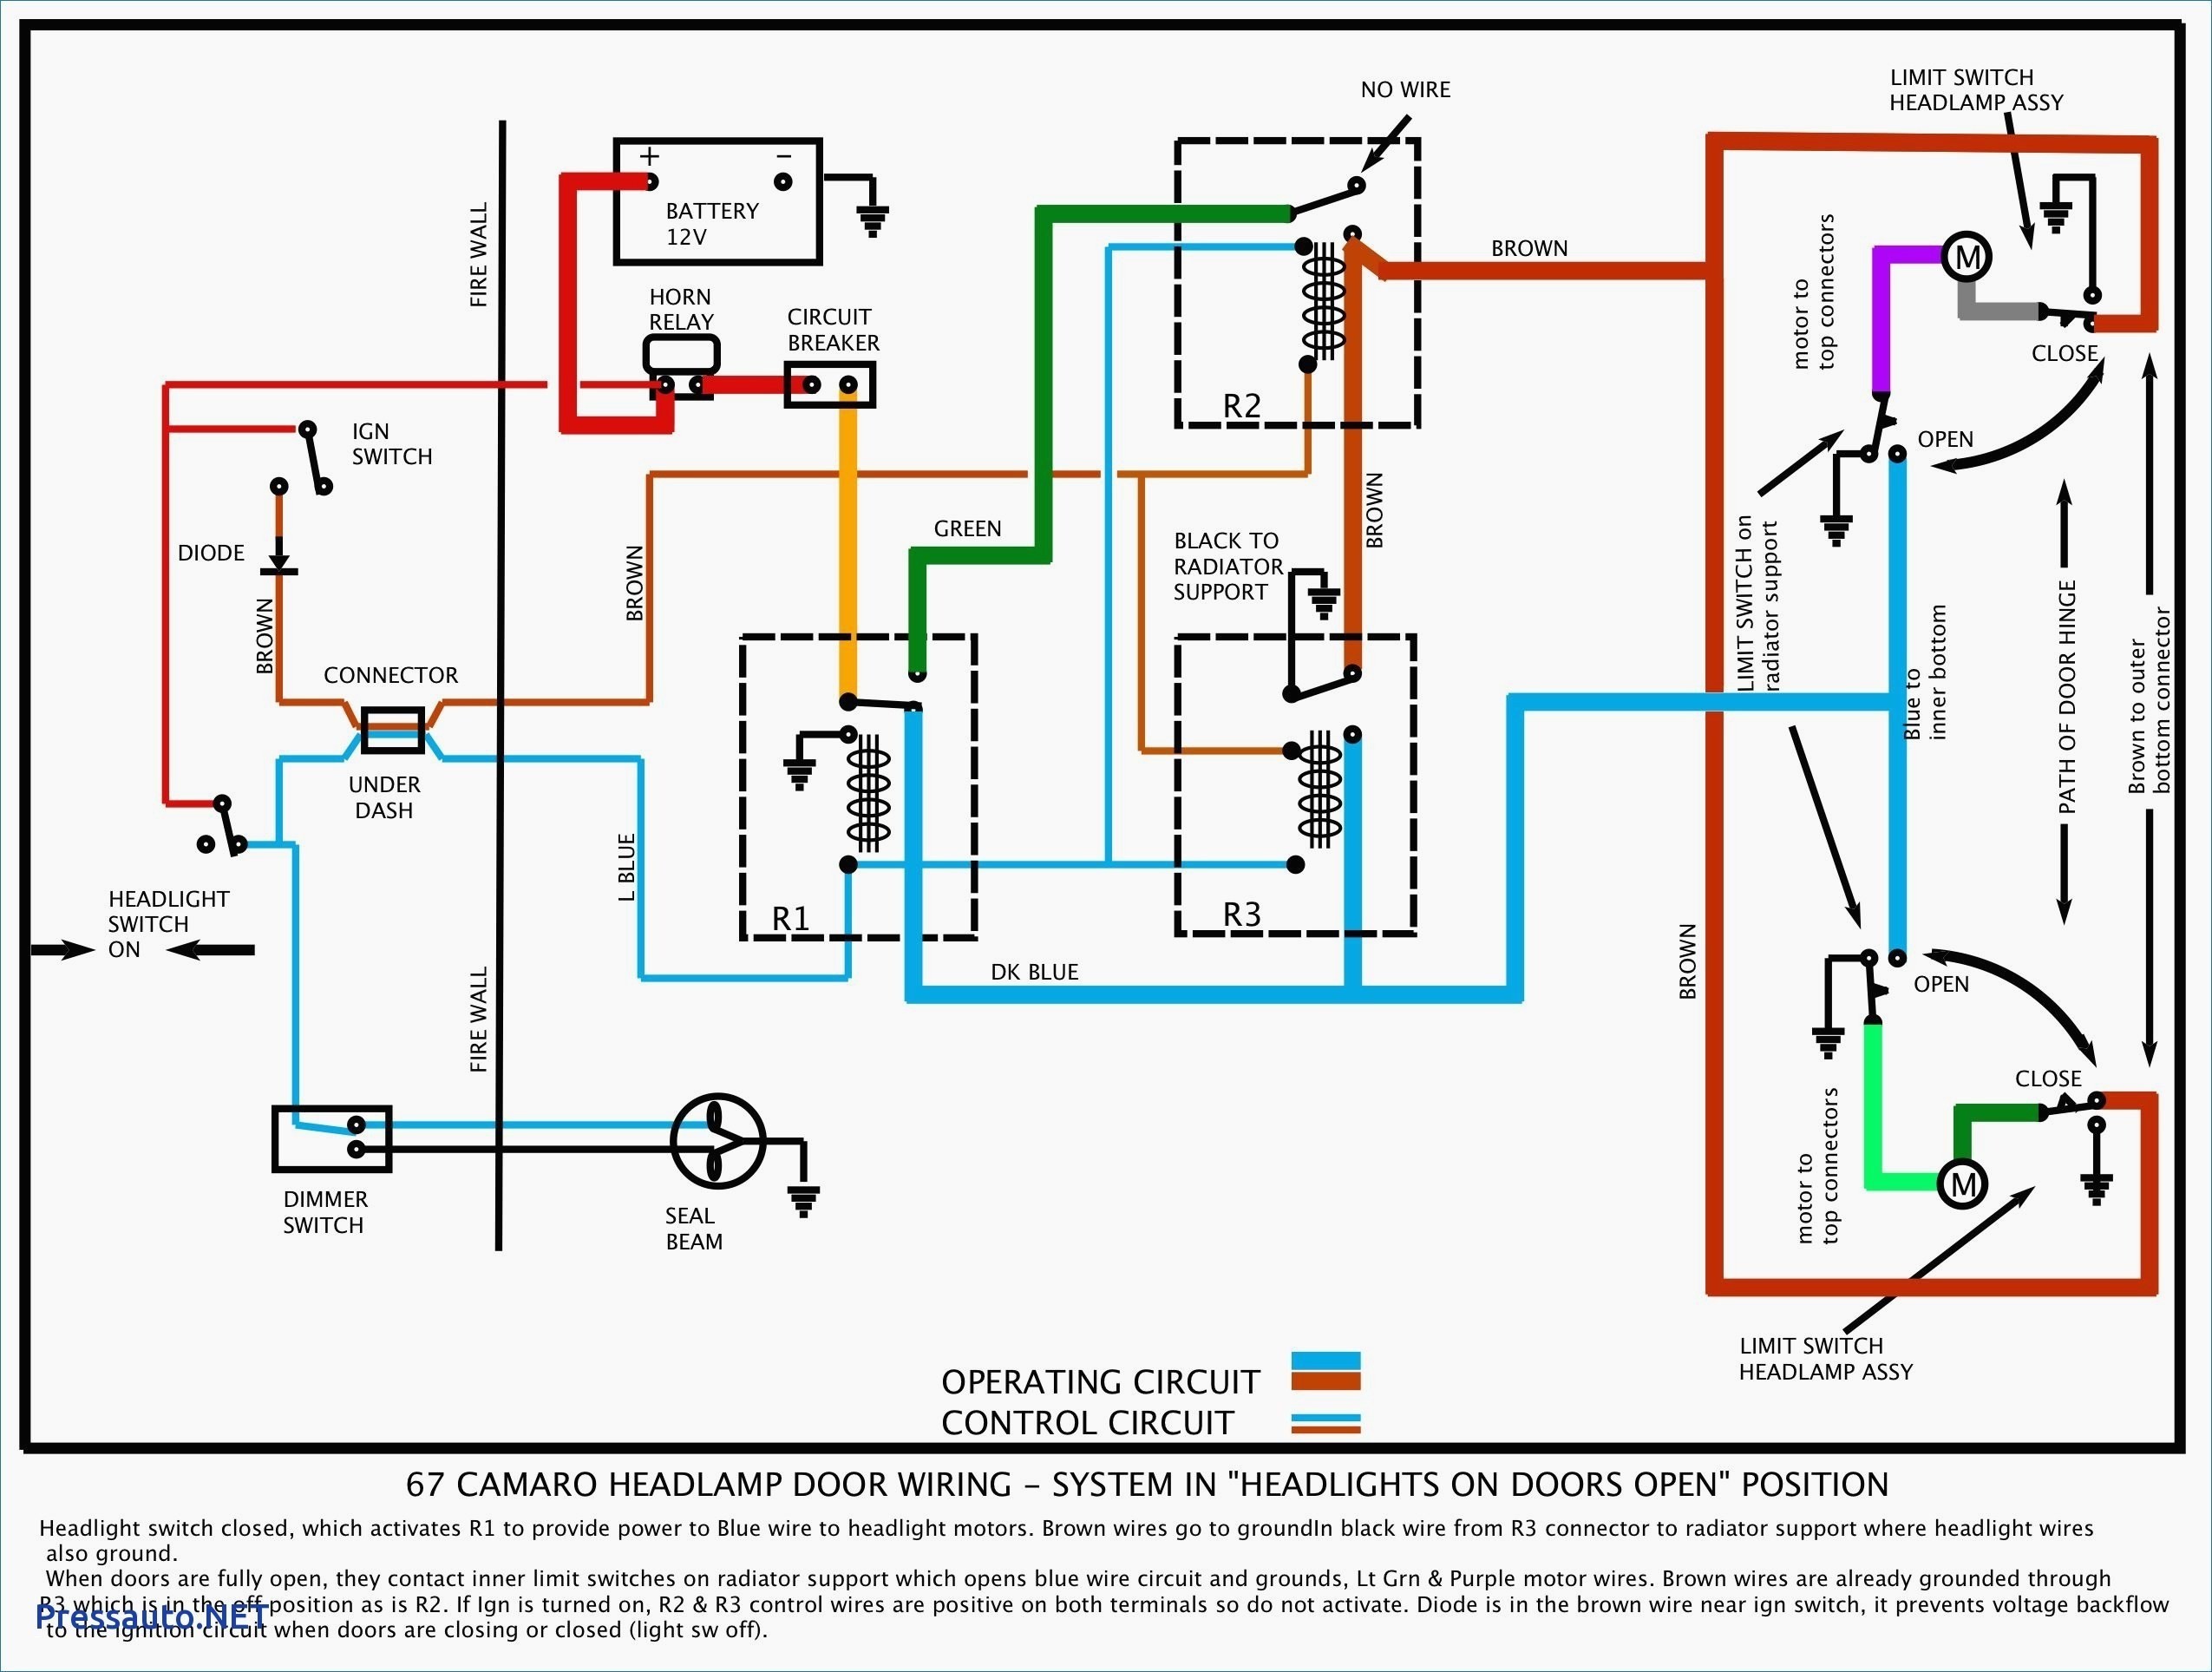 Wiring Diagram for 3 Way Electrical Switch Save Wiring Diagram 3 Way Switch New 3 Way